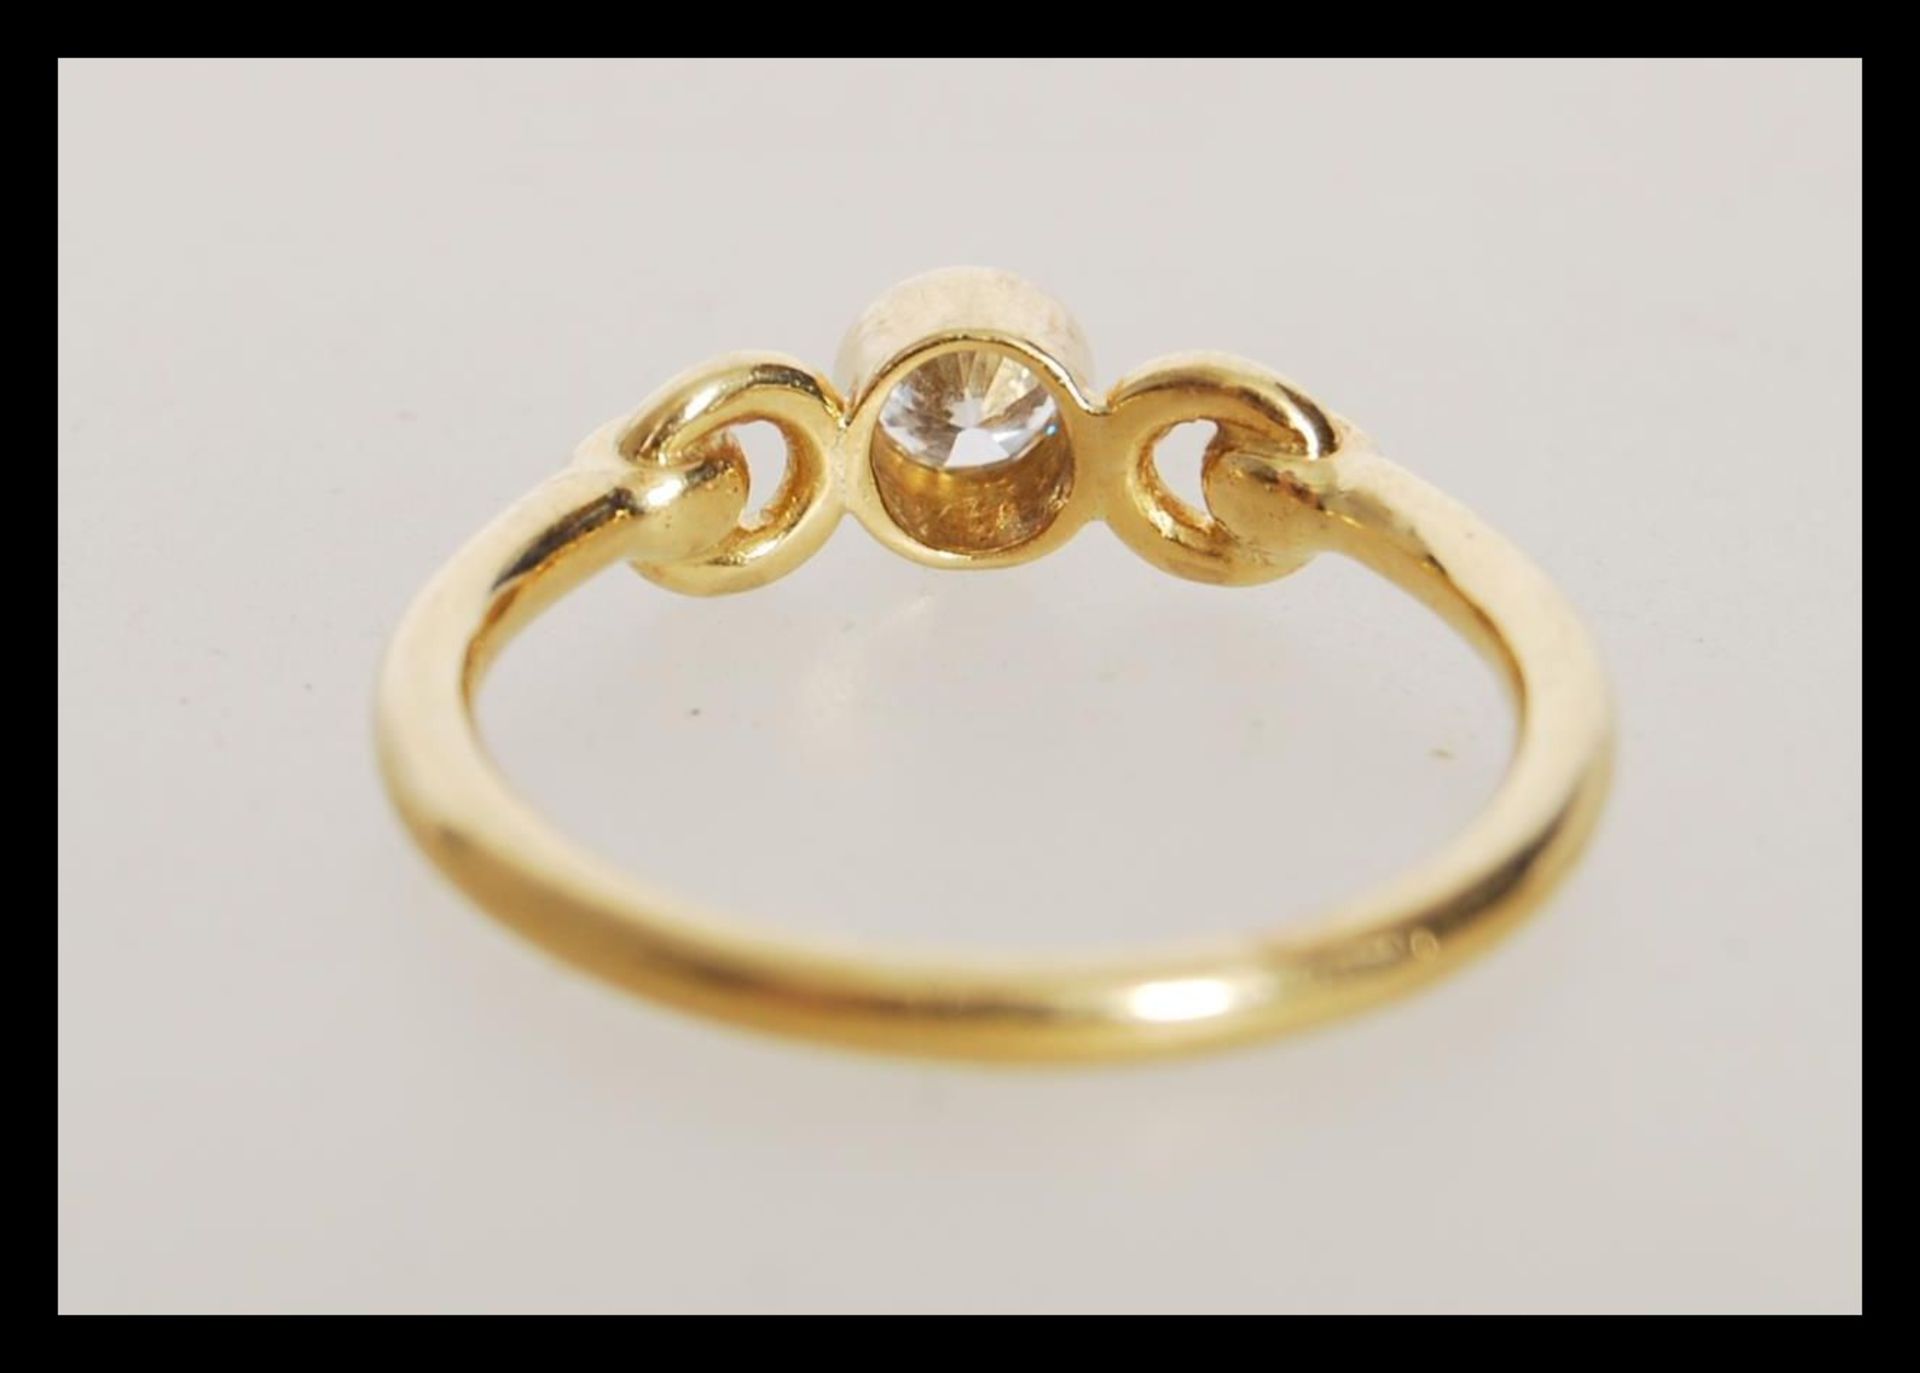 A hallmarked 18ct gold ring set bezel set with a brilliant cut diamond with decorative looped - Image 3 of 4